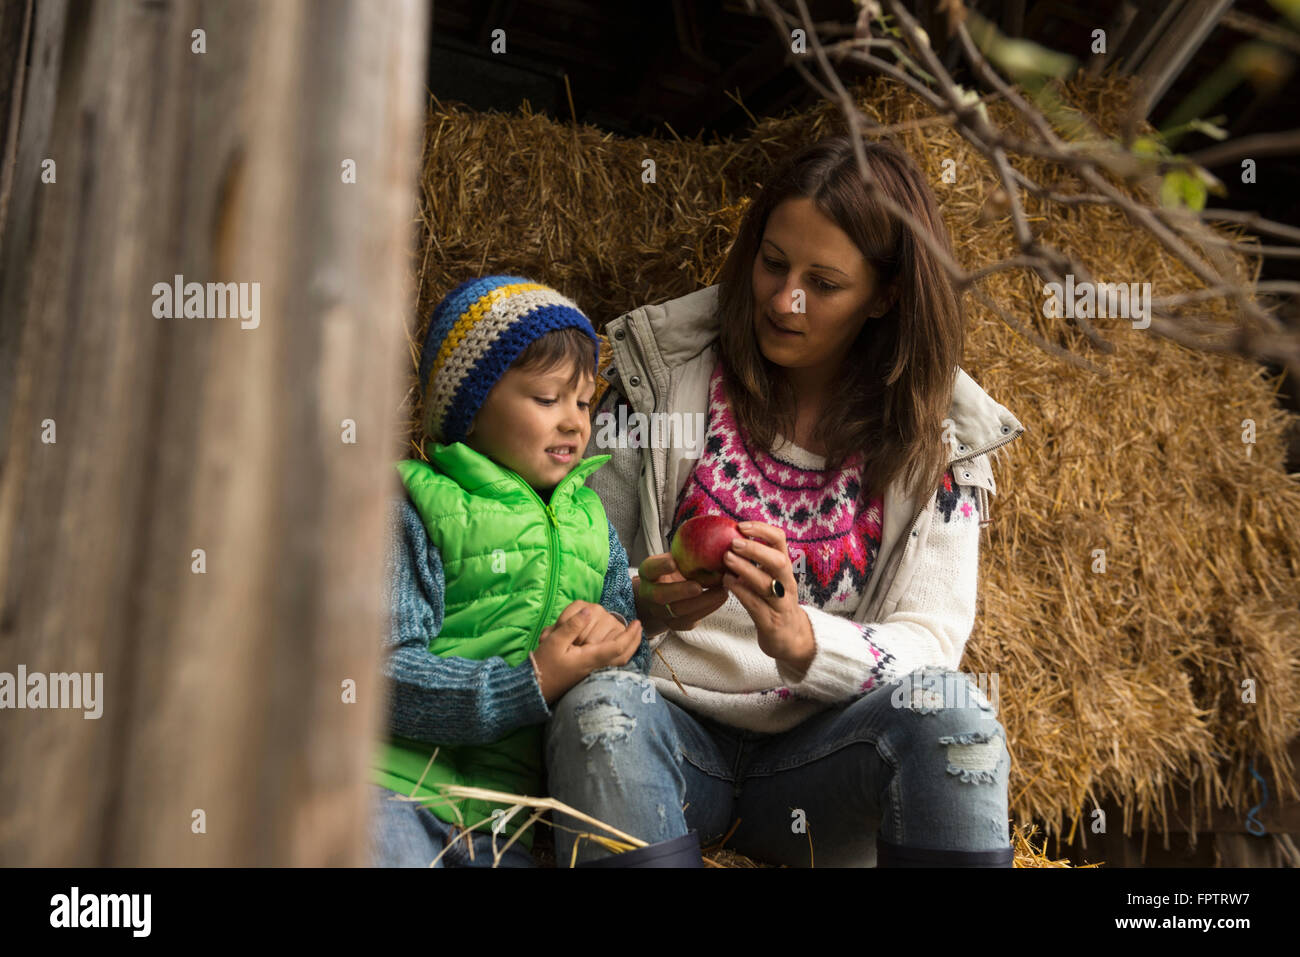 Mother and son sitting on straw in the stable, Bavaria, Germany Stock Photo